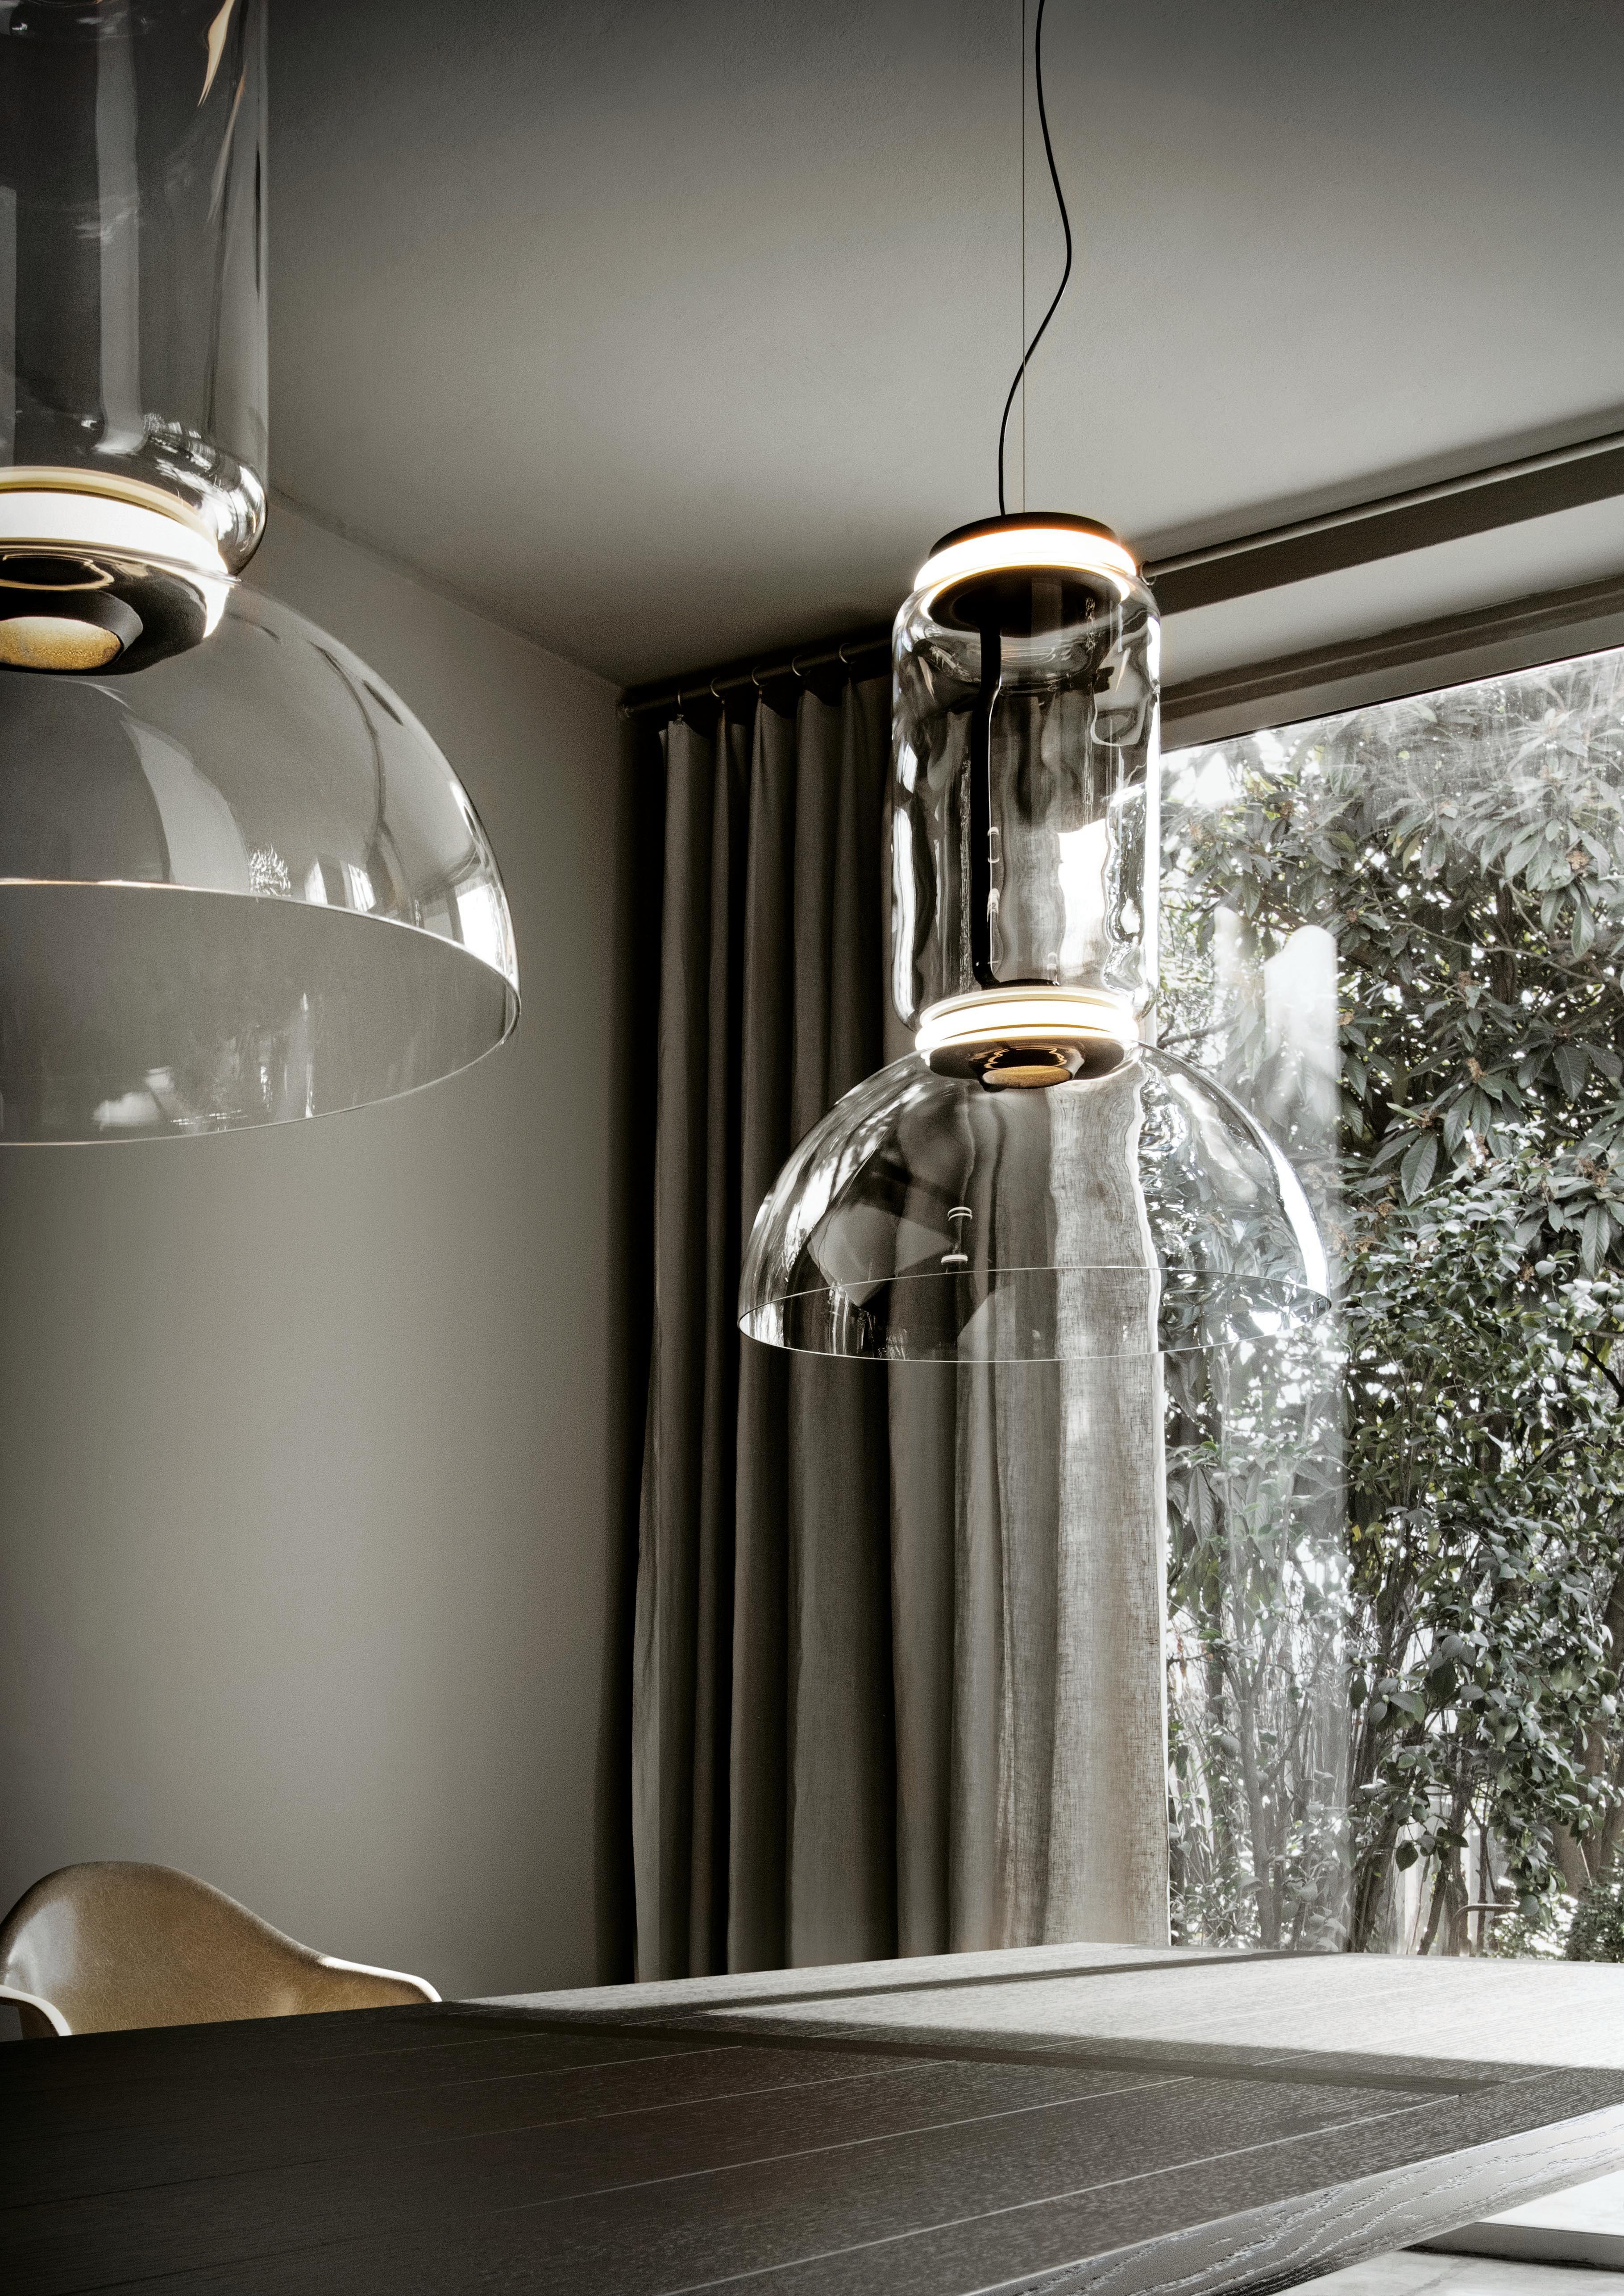 Noctambule LED dimmable pendant light with bowl shade, created by renowned designer Konstantin Grcic for Flos, is an innovative lighting system that comes in an array of artful designs. A transparent hand-blown glass cylinder, surrounded on both top